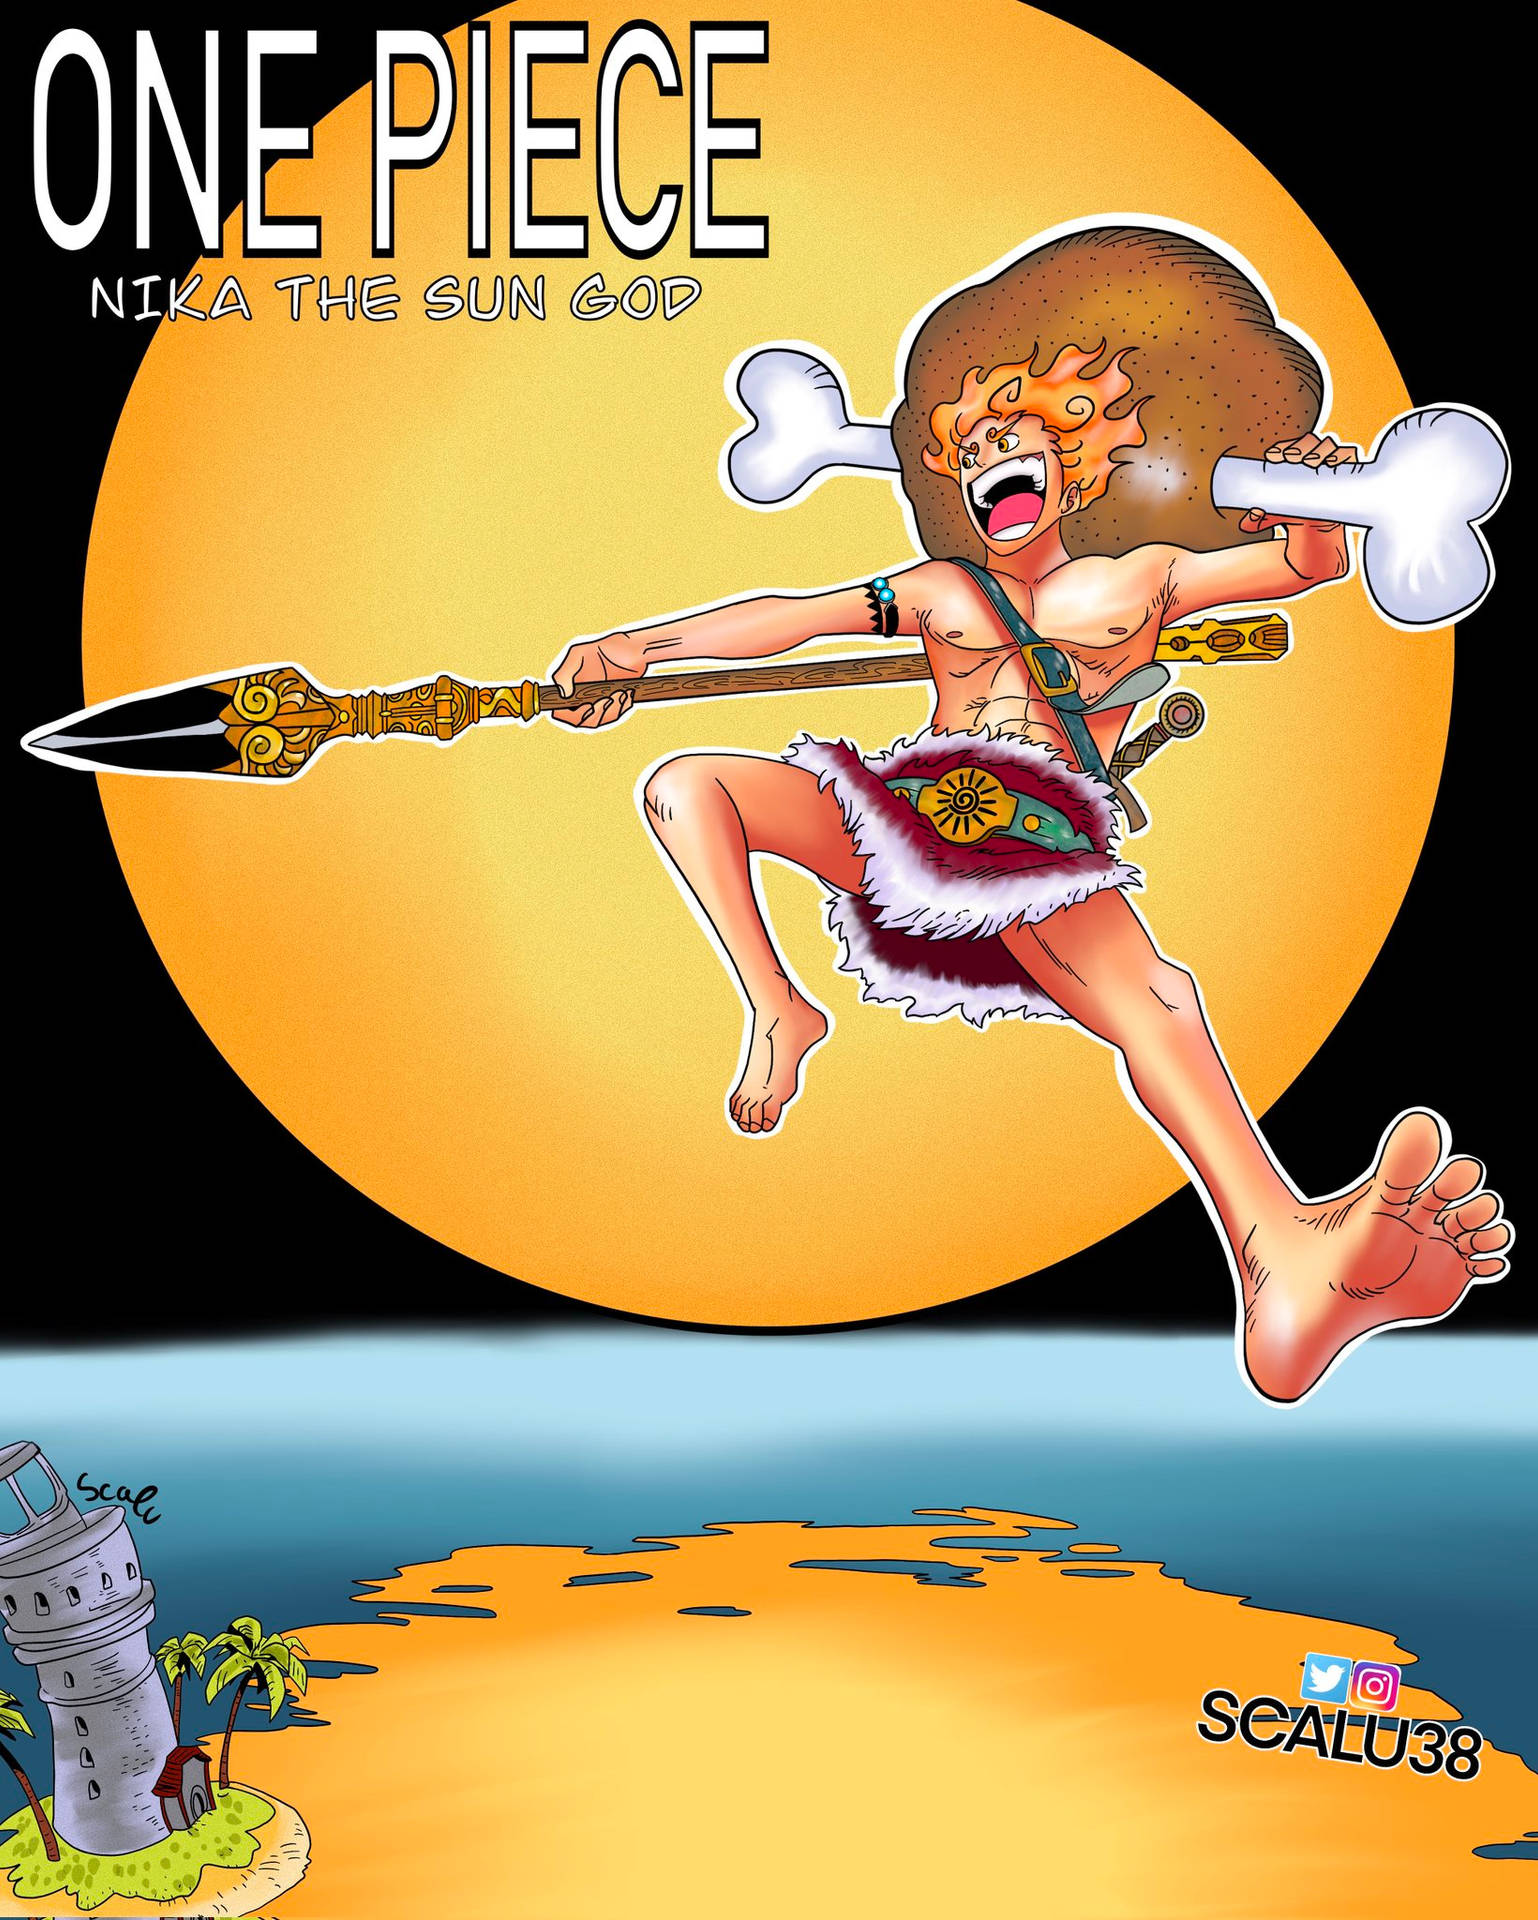 One Piece - A Cartoon Character Flying With A Sword Wallpaper